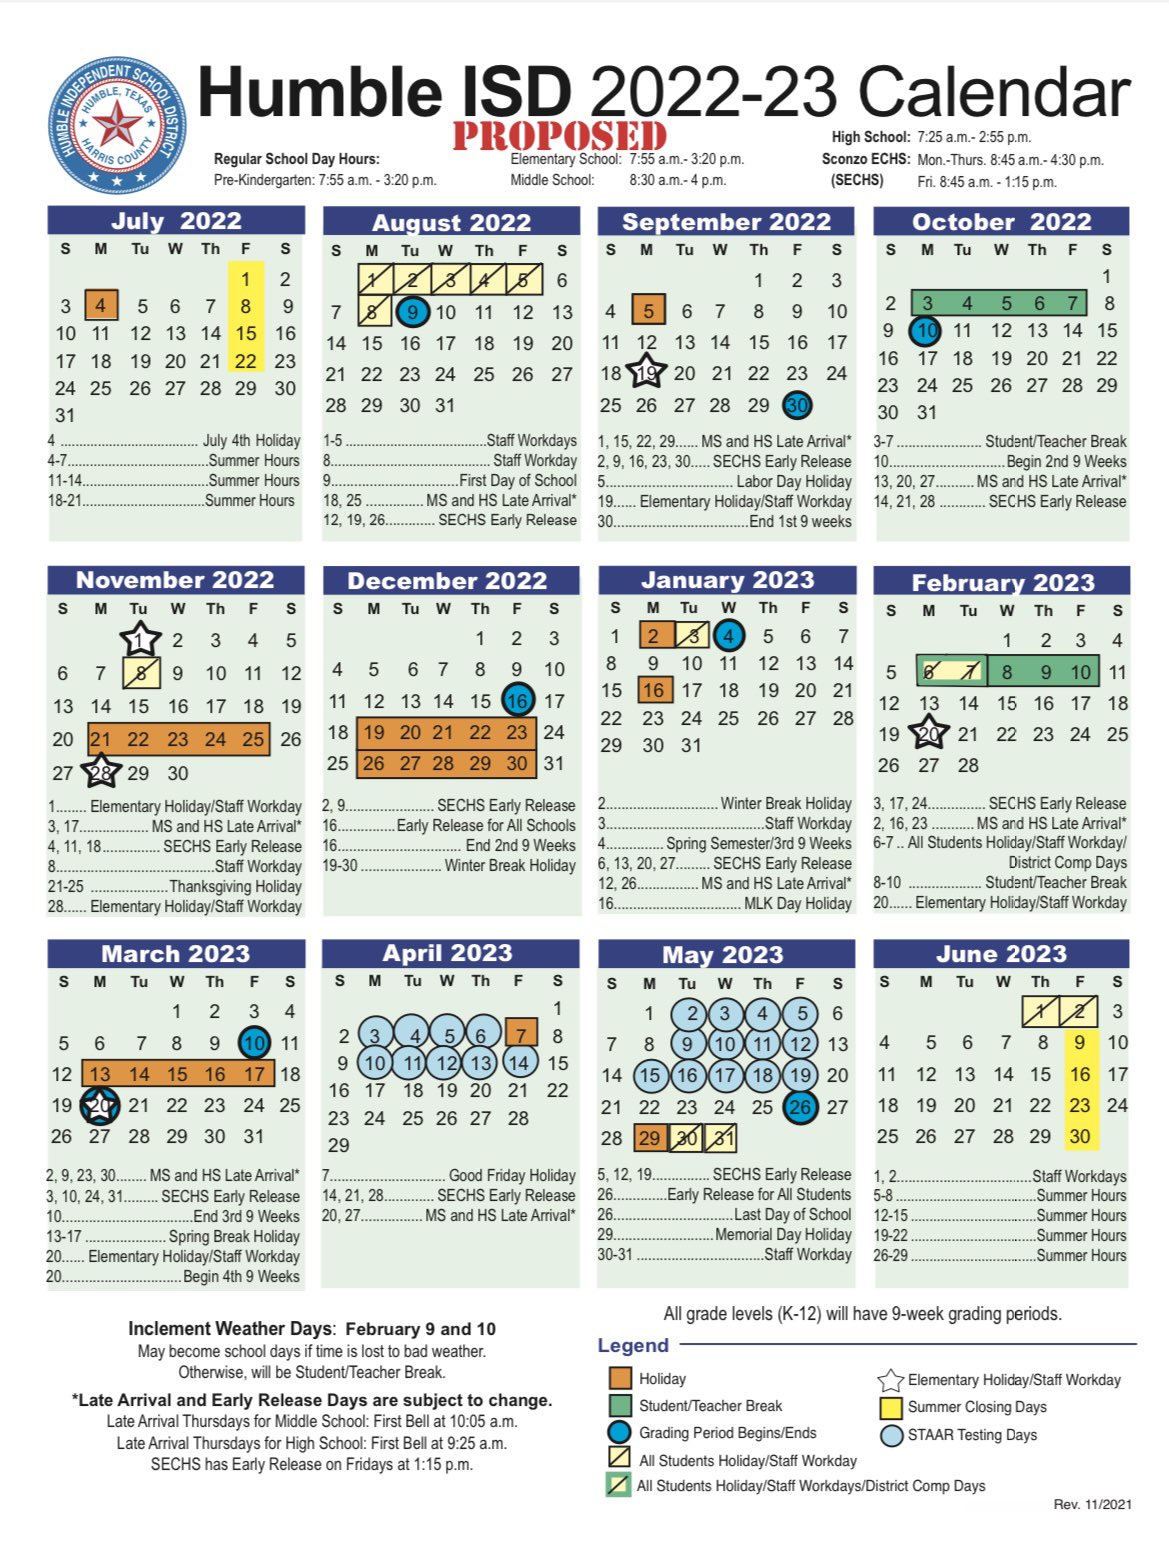 Spring Isd Calendar 2022 2023 Atascocita Middle On Twitter: "📆Humble Isd Proposed 2022-2023 Calendar  Humble Isd's Proposed 2022-2023 Calendar Closely Resembles This Year's  Calendar To Support Consistency For Students, Parents And Staff.  🐅#Atascatigers Https://T.co/Fvdixjcfm8 ...